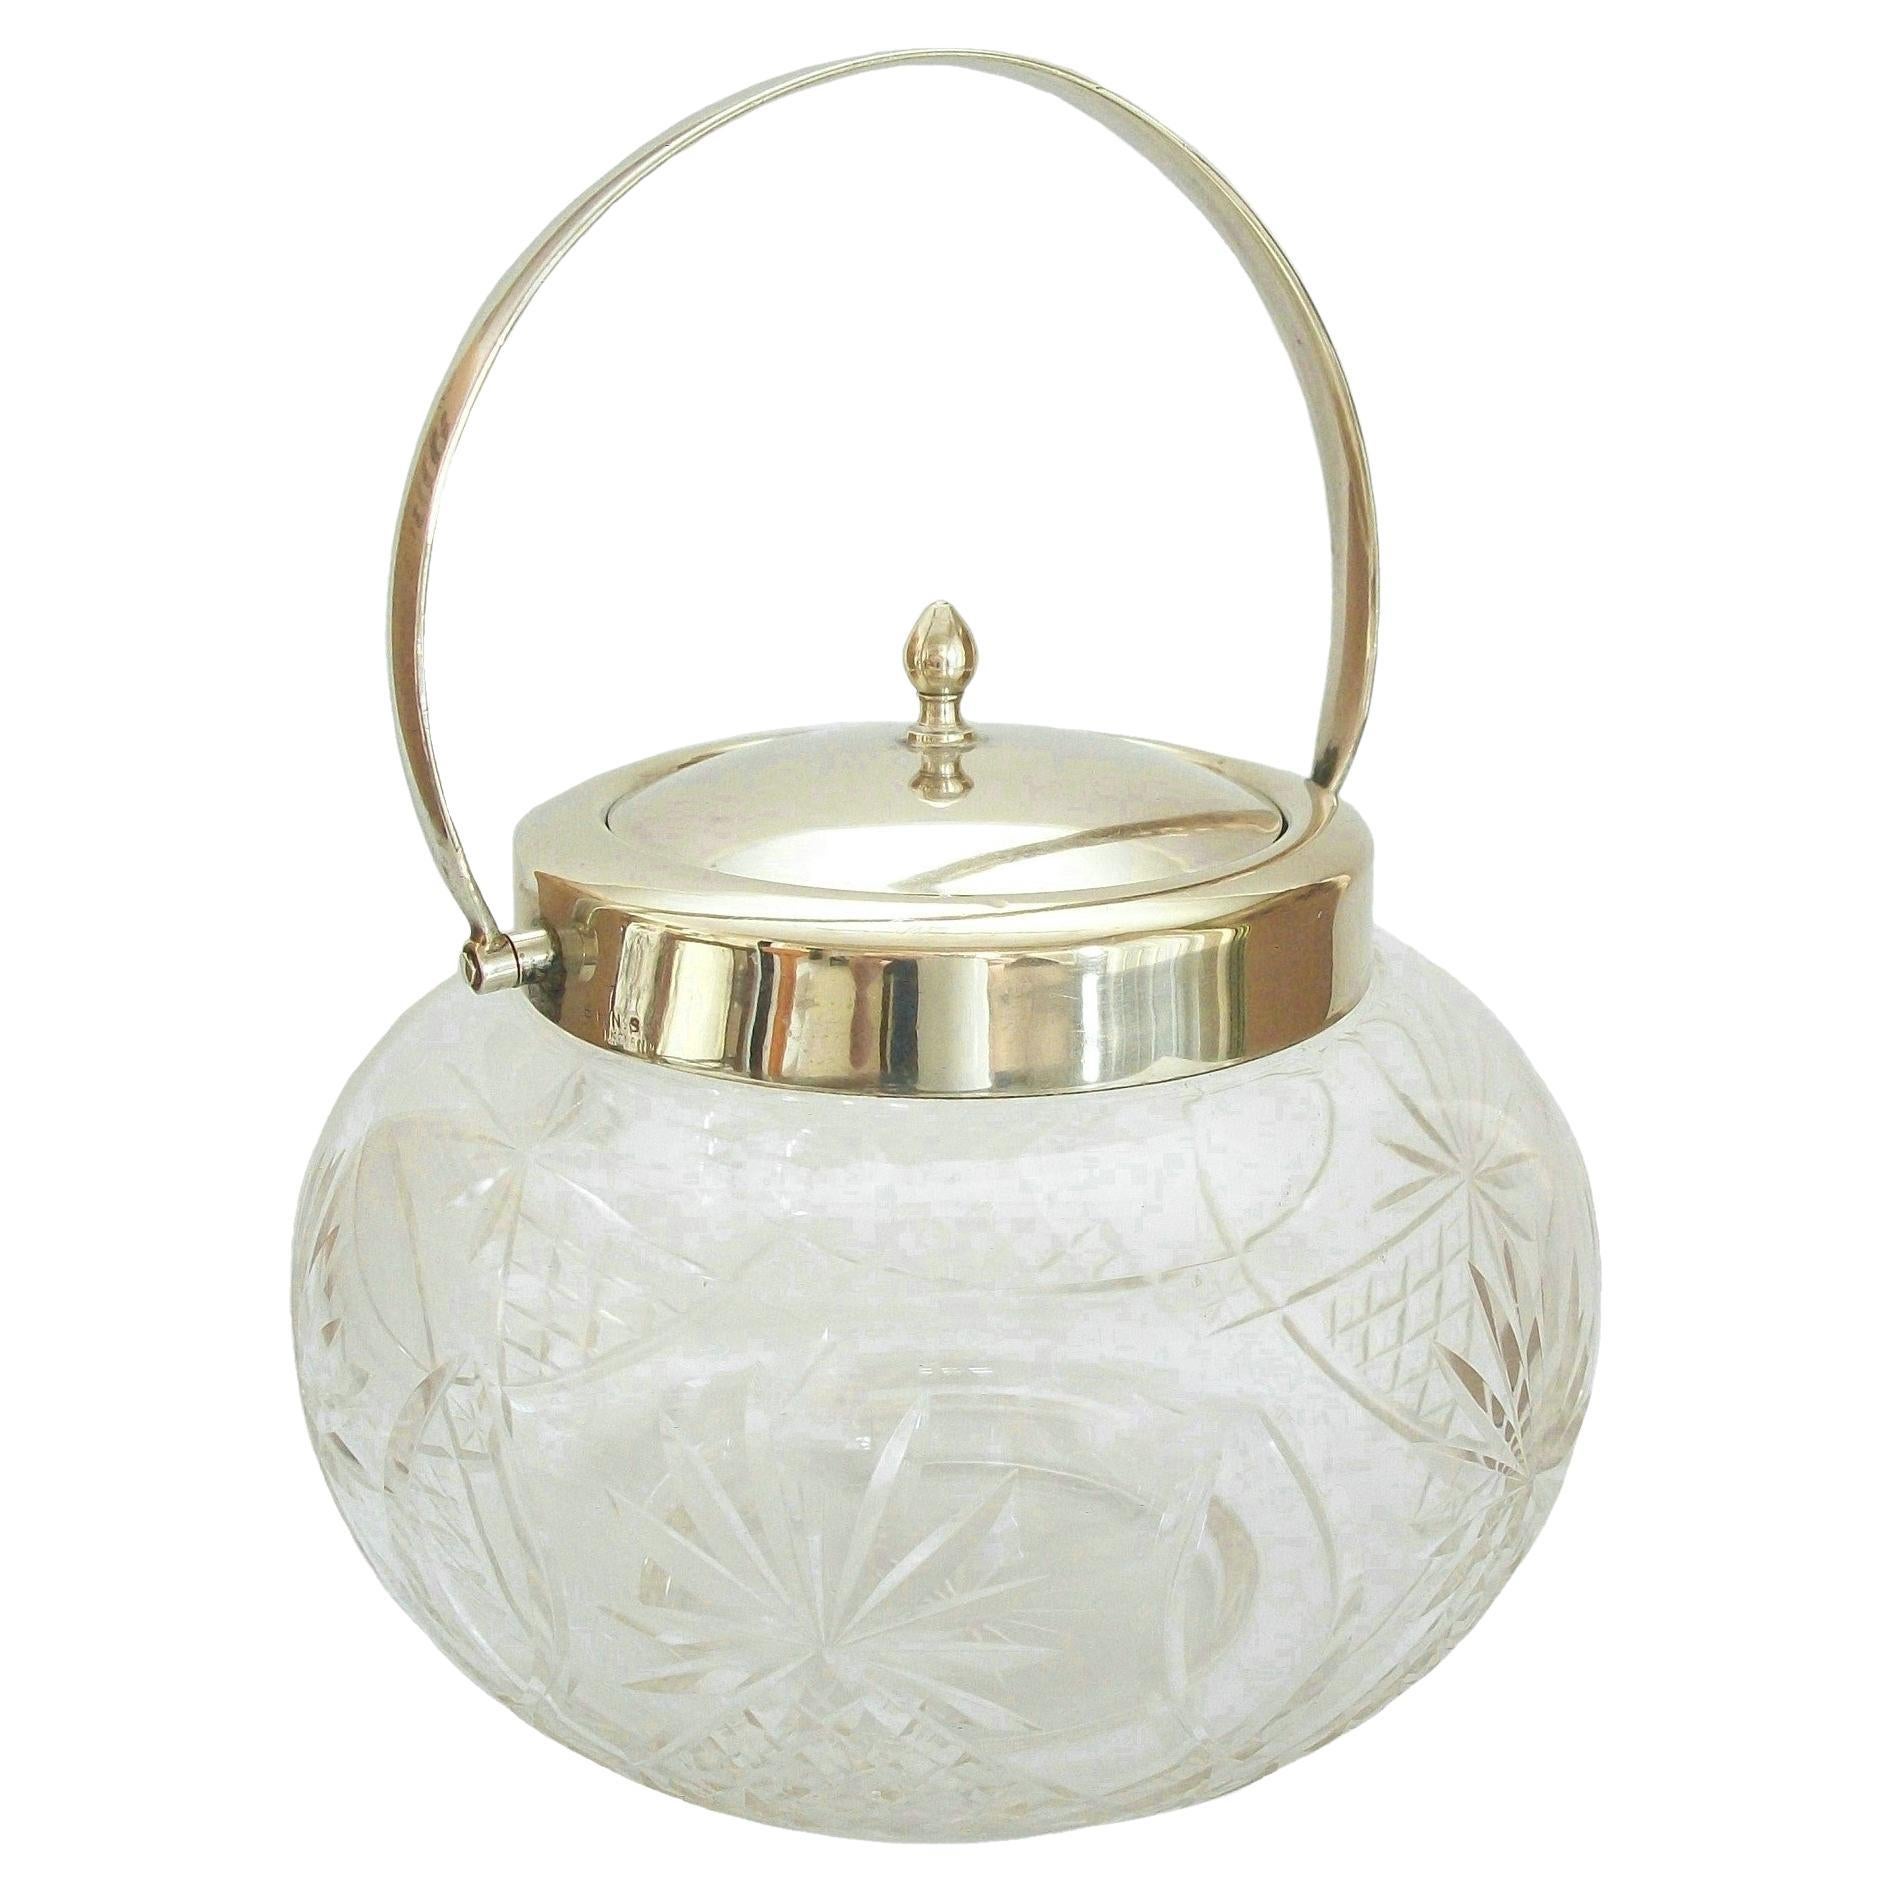 Cut Crystal & Silverplate Biscuit Barrel - United Kingdom - Early 20th Century For Sale